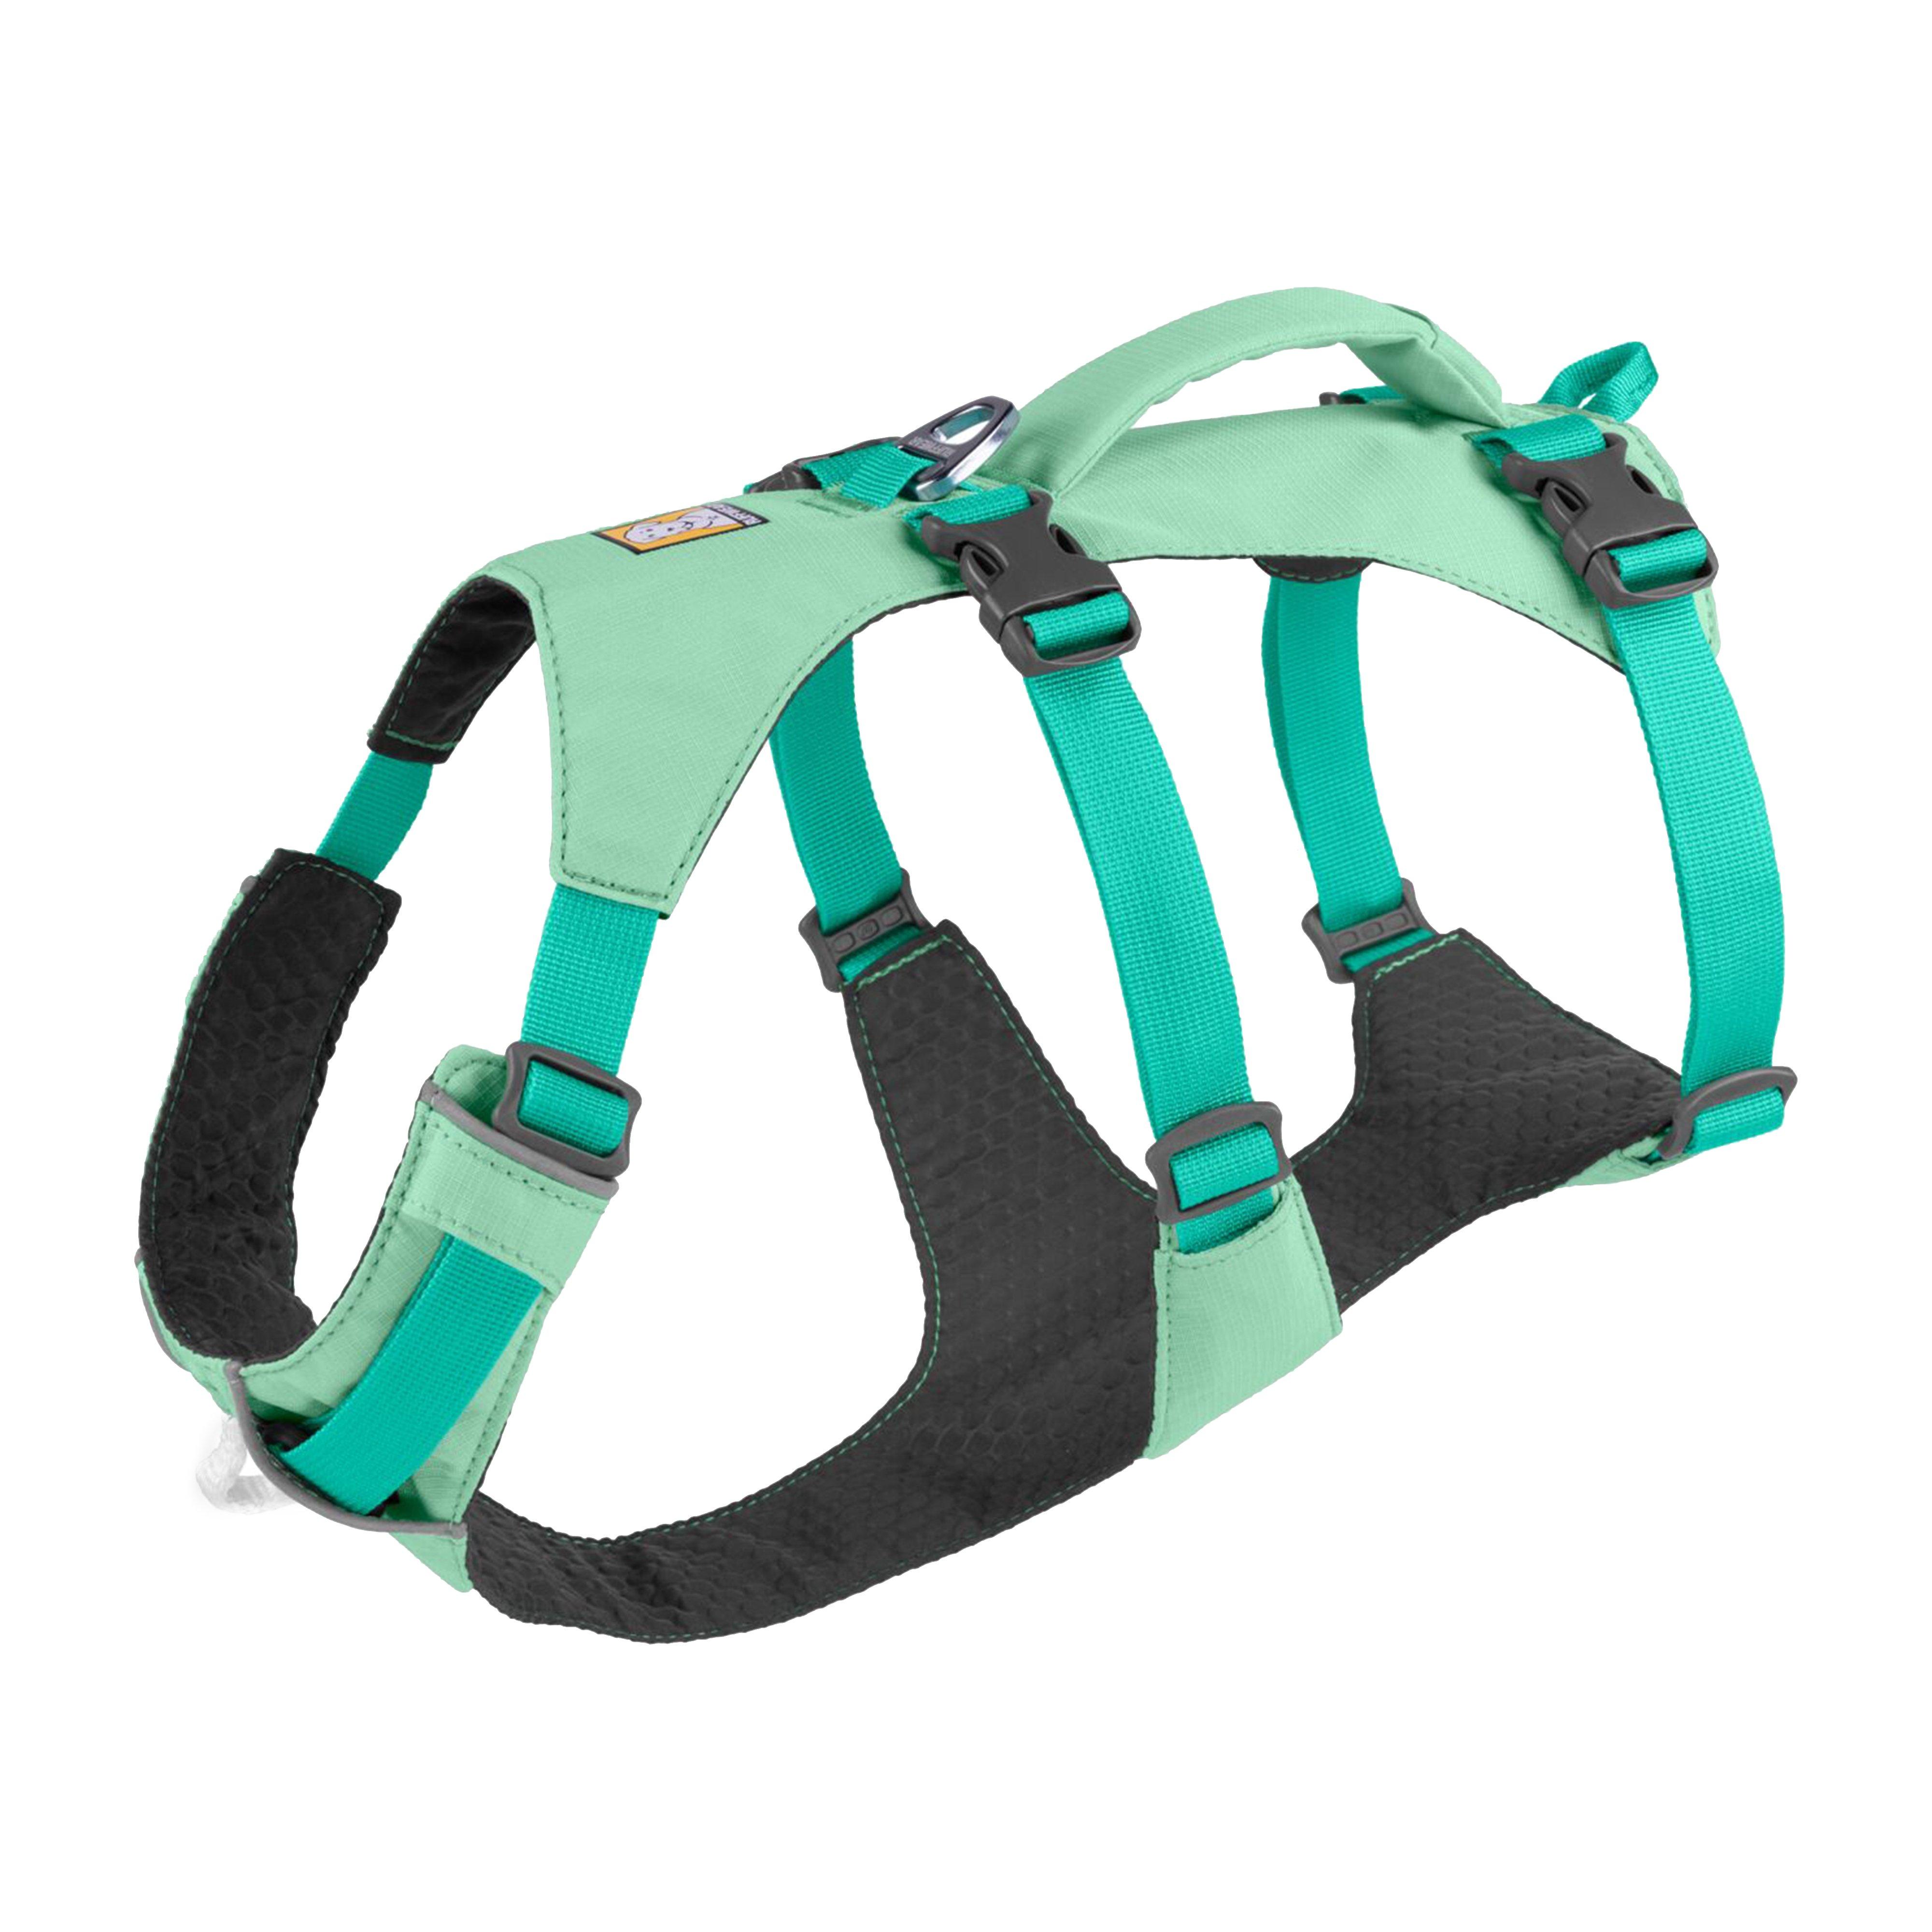 Flagline Dog Harness with Handle Sage Green